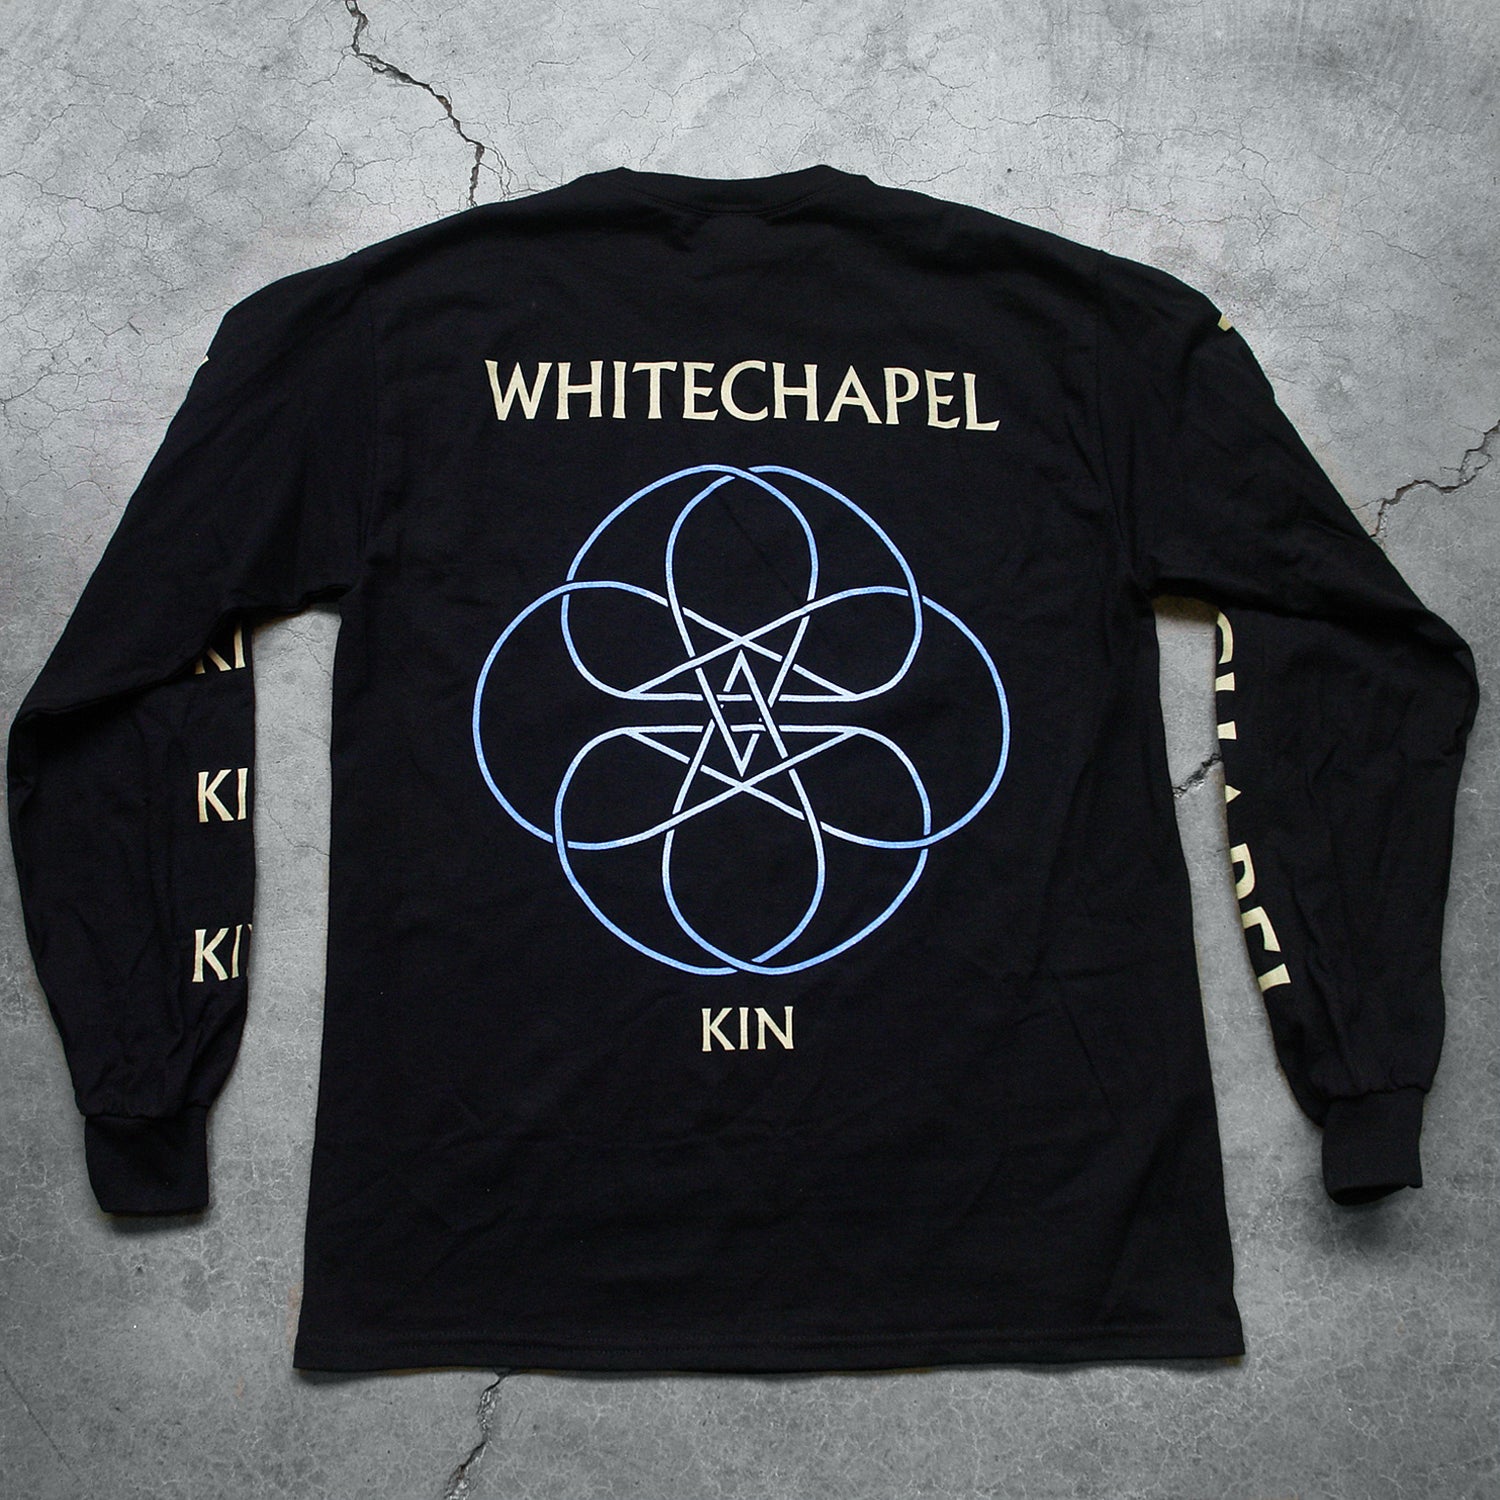 Image of the back of a black longsleeve against a grey concrete background. The left sleeve says "Kin" on it 5 times in white text. the right says "whitechapel", just once, in white text. The back of the longsleeve reads "whitechapel" across the shoulders in white text. Below this is an abstract thin lined pattern in white and blue. It loosk like a circle with lines and stars in the center. Below this in white text reads "kin".